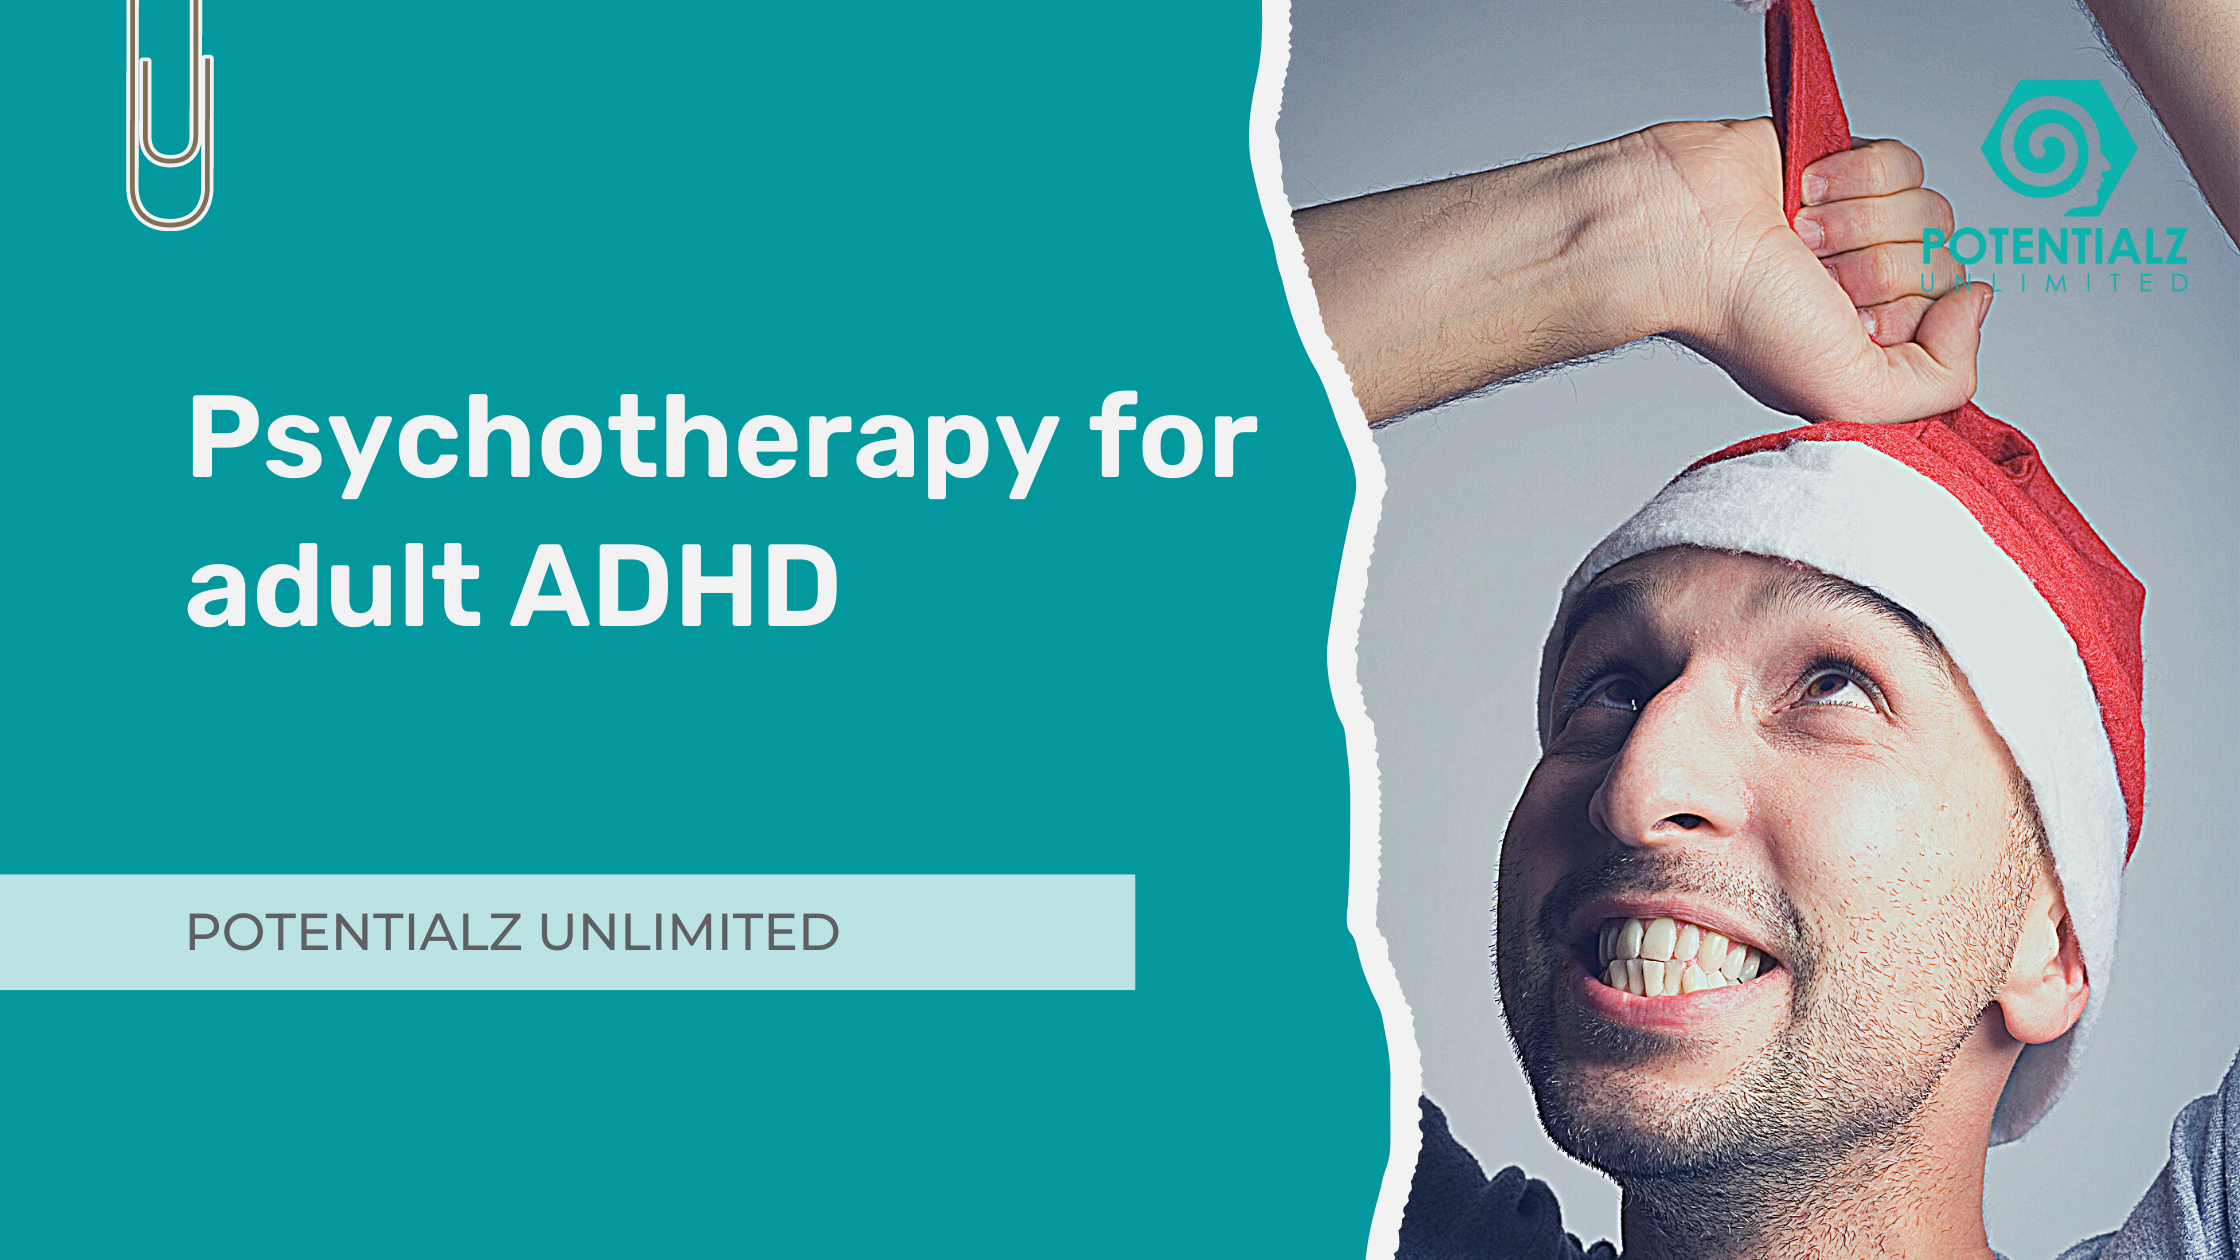 how psychotherapy can help people with Adult ADHD